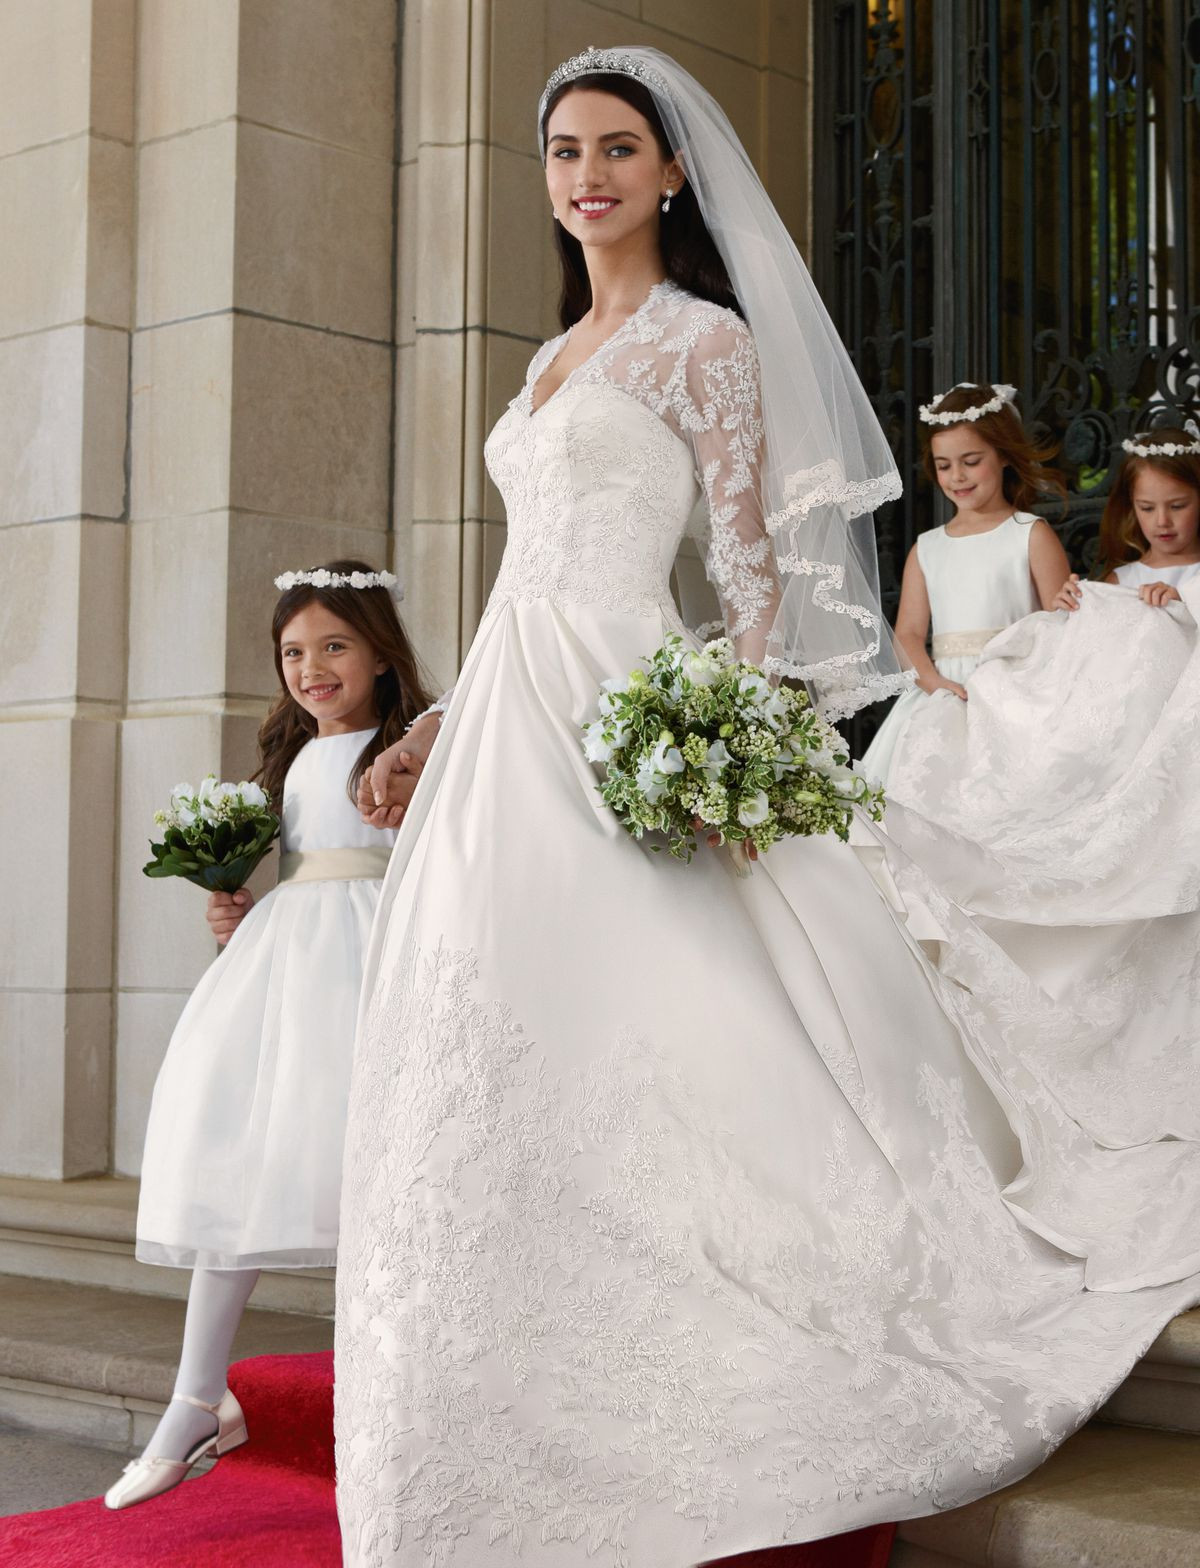 Kate Middleton Wedding Gown
 How Meghan Markle’s Wedding Dress Will Influence What